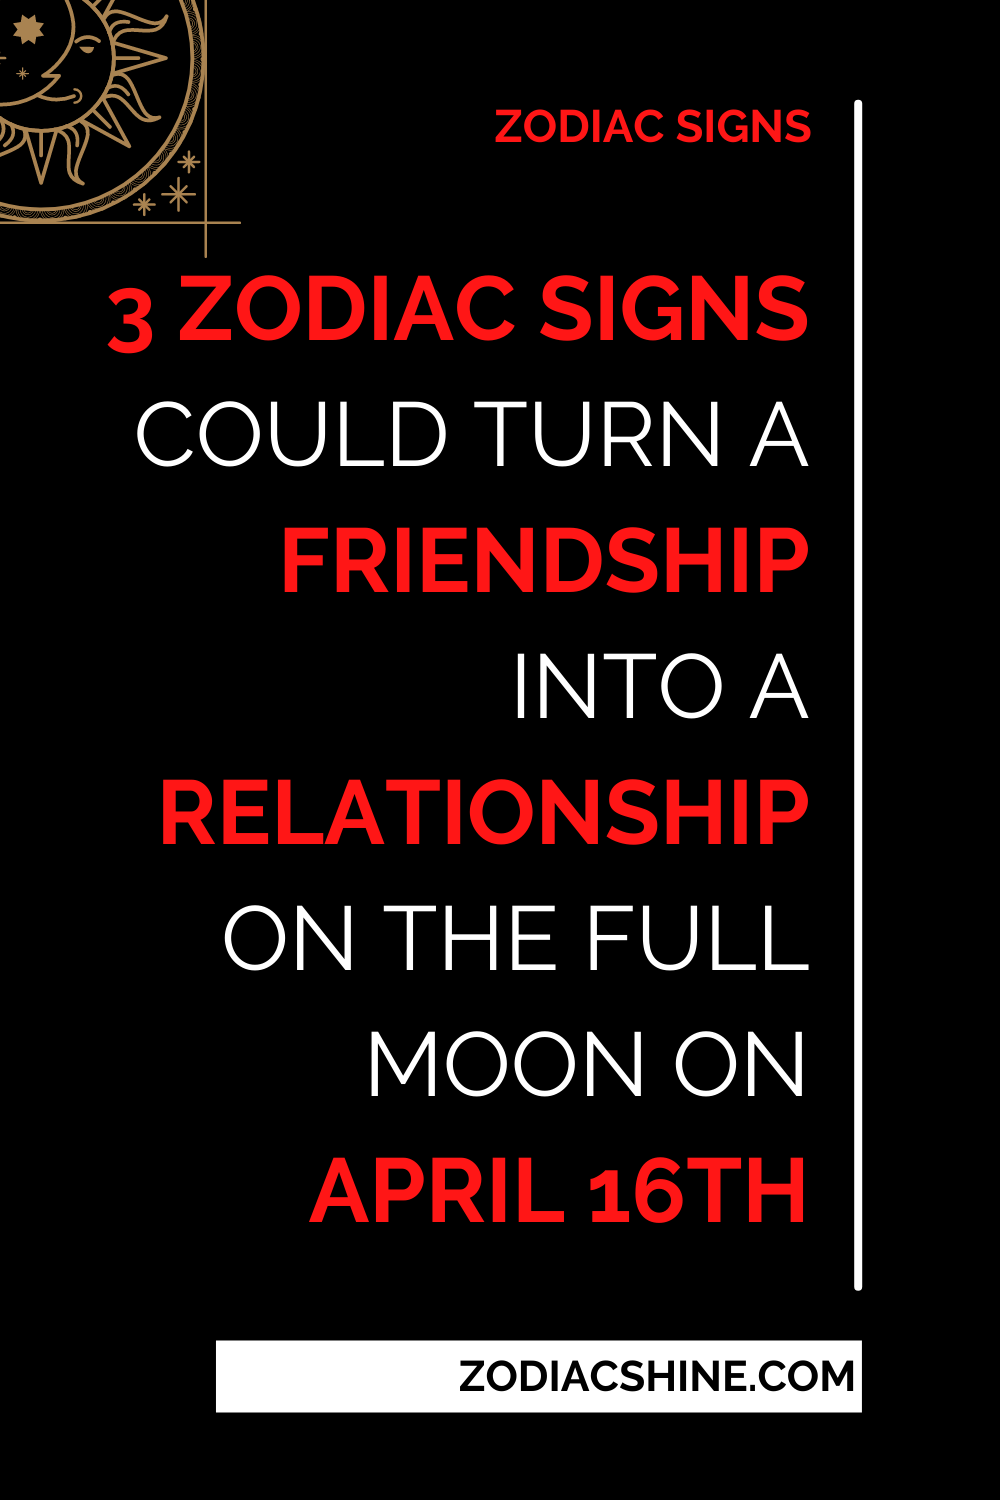 3 Zodiac Signs Could Turn A Friendship Into A Relationship On The Full Moon On April 16th